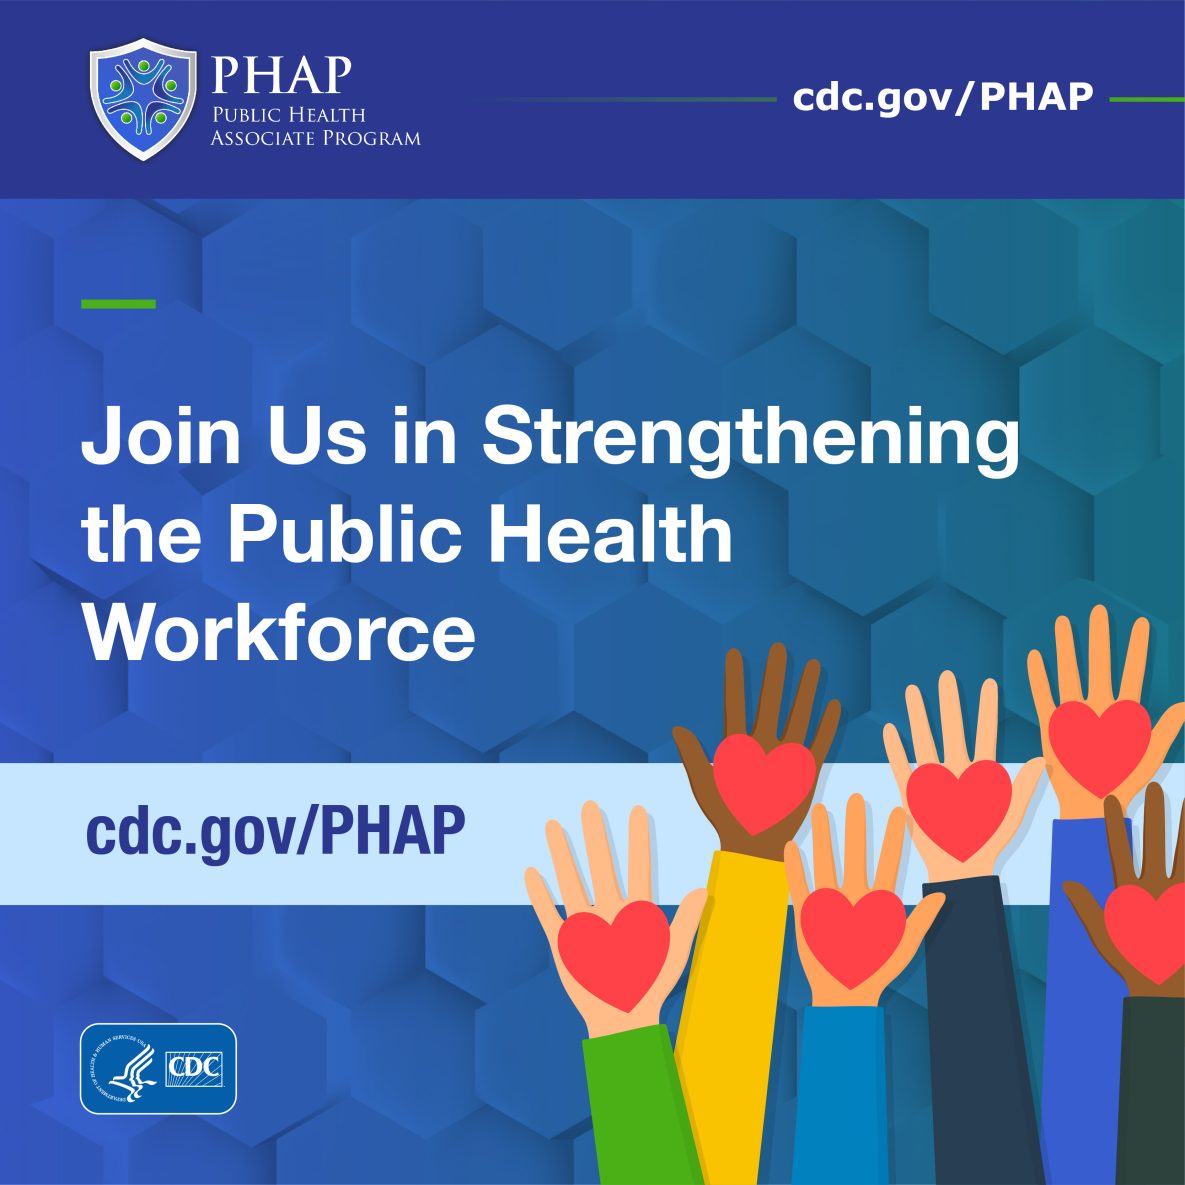 Info graphic with the text, “Join Us in Strengthening the Public Health Workforce. cdc.gov/PHAP.”